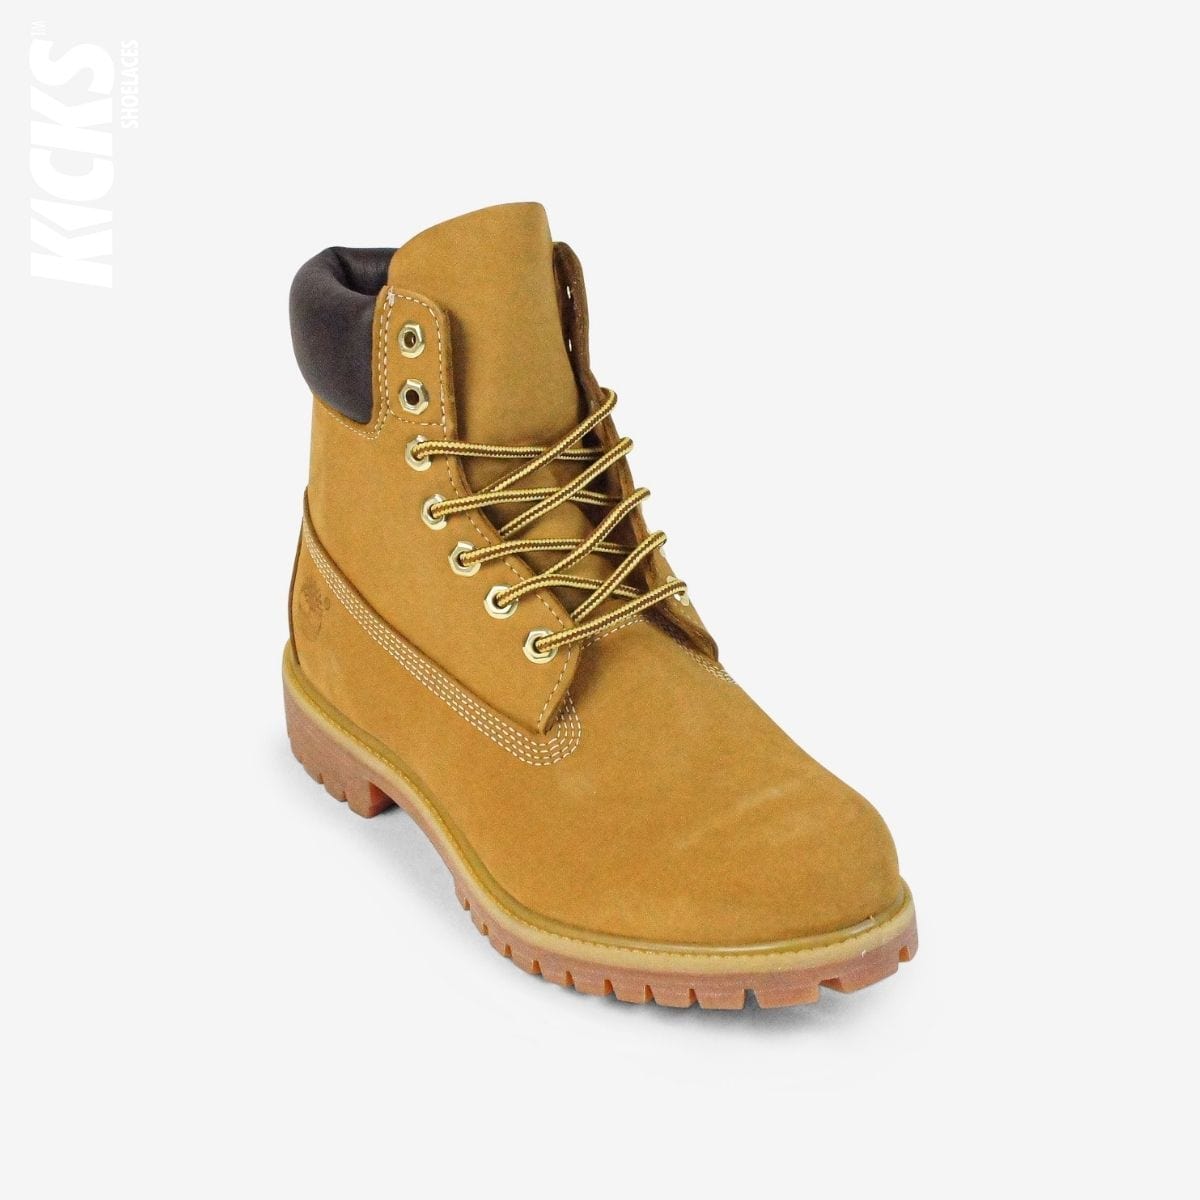 shoelaces-online-deep-brown-and-yellow-boot-laces